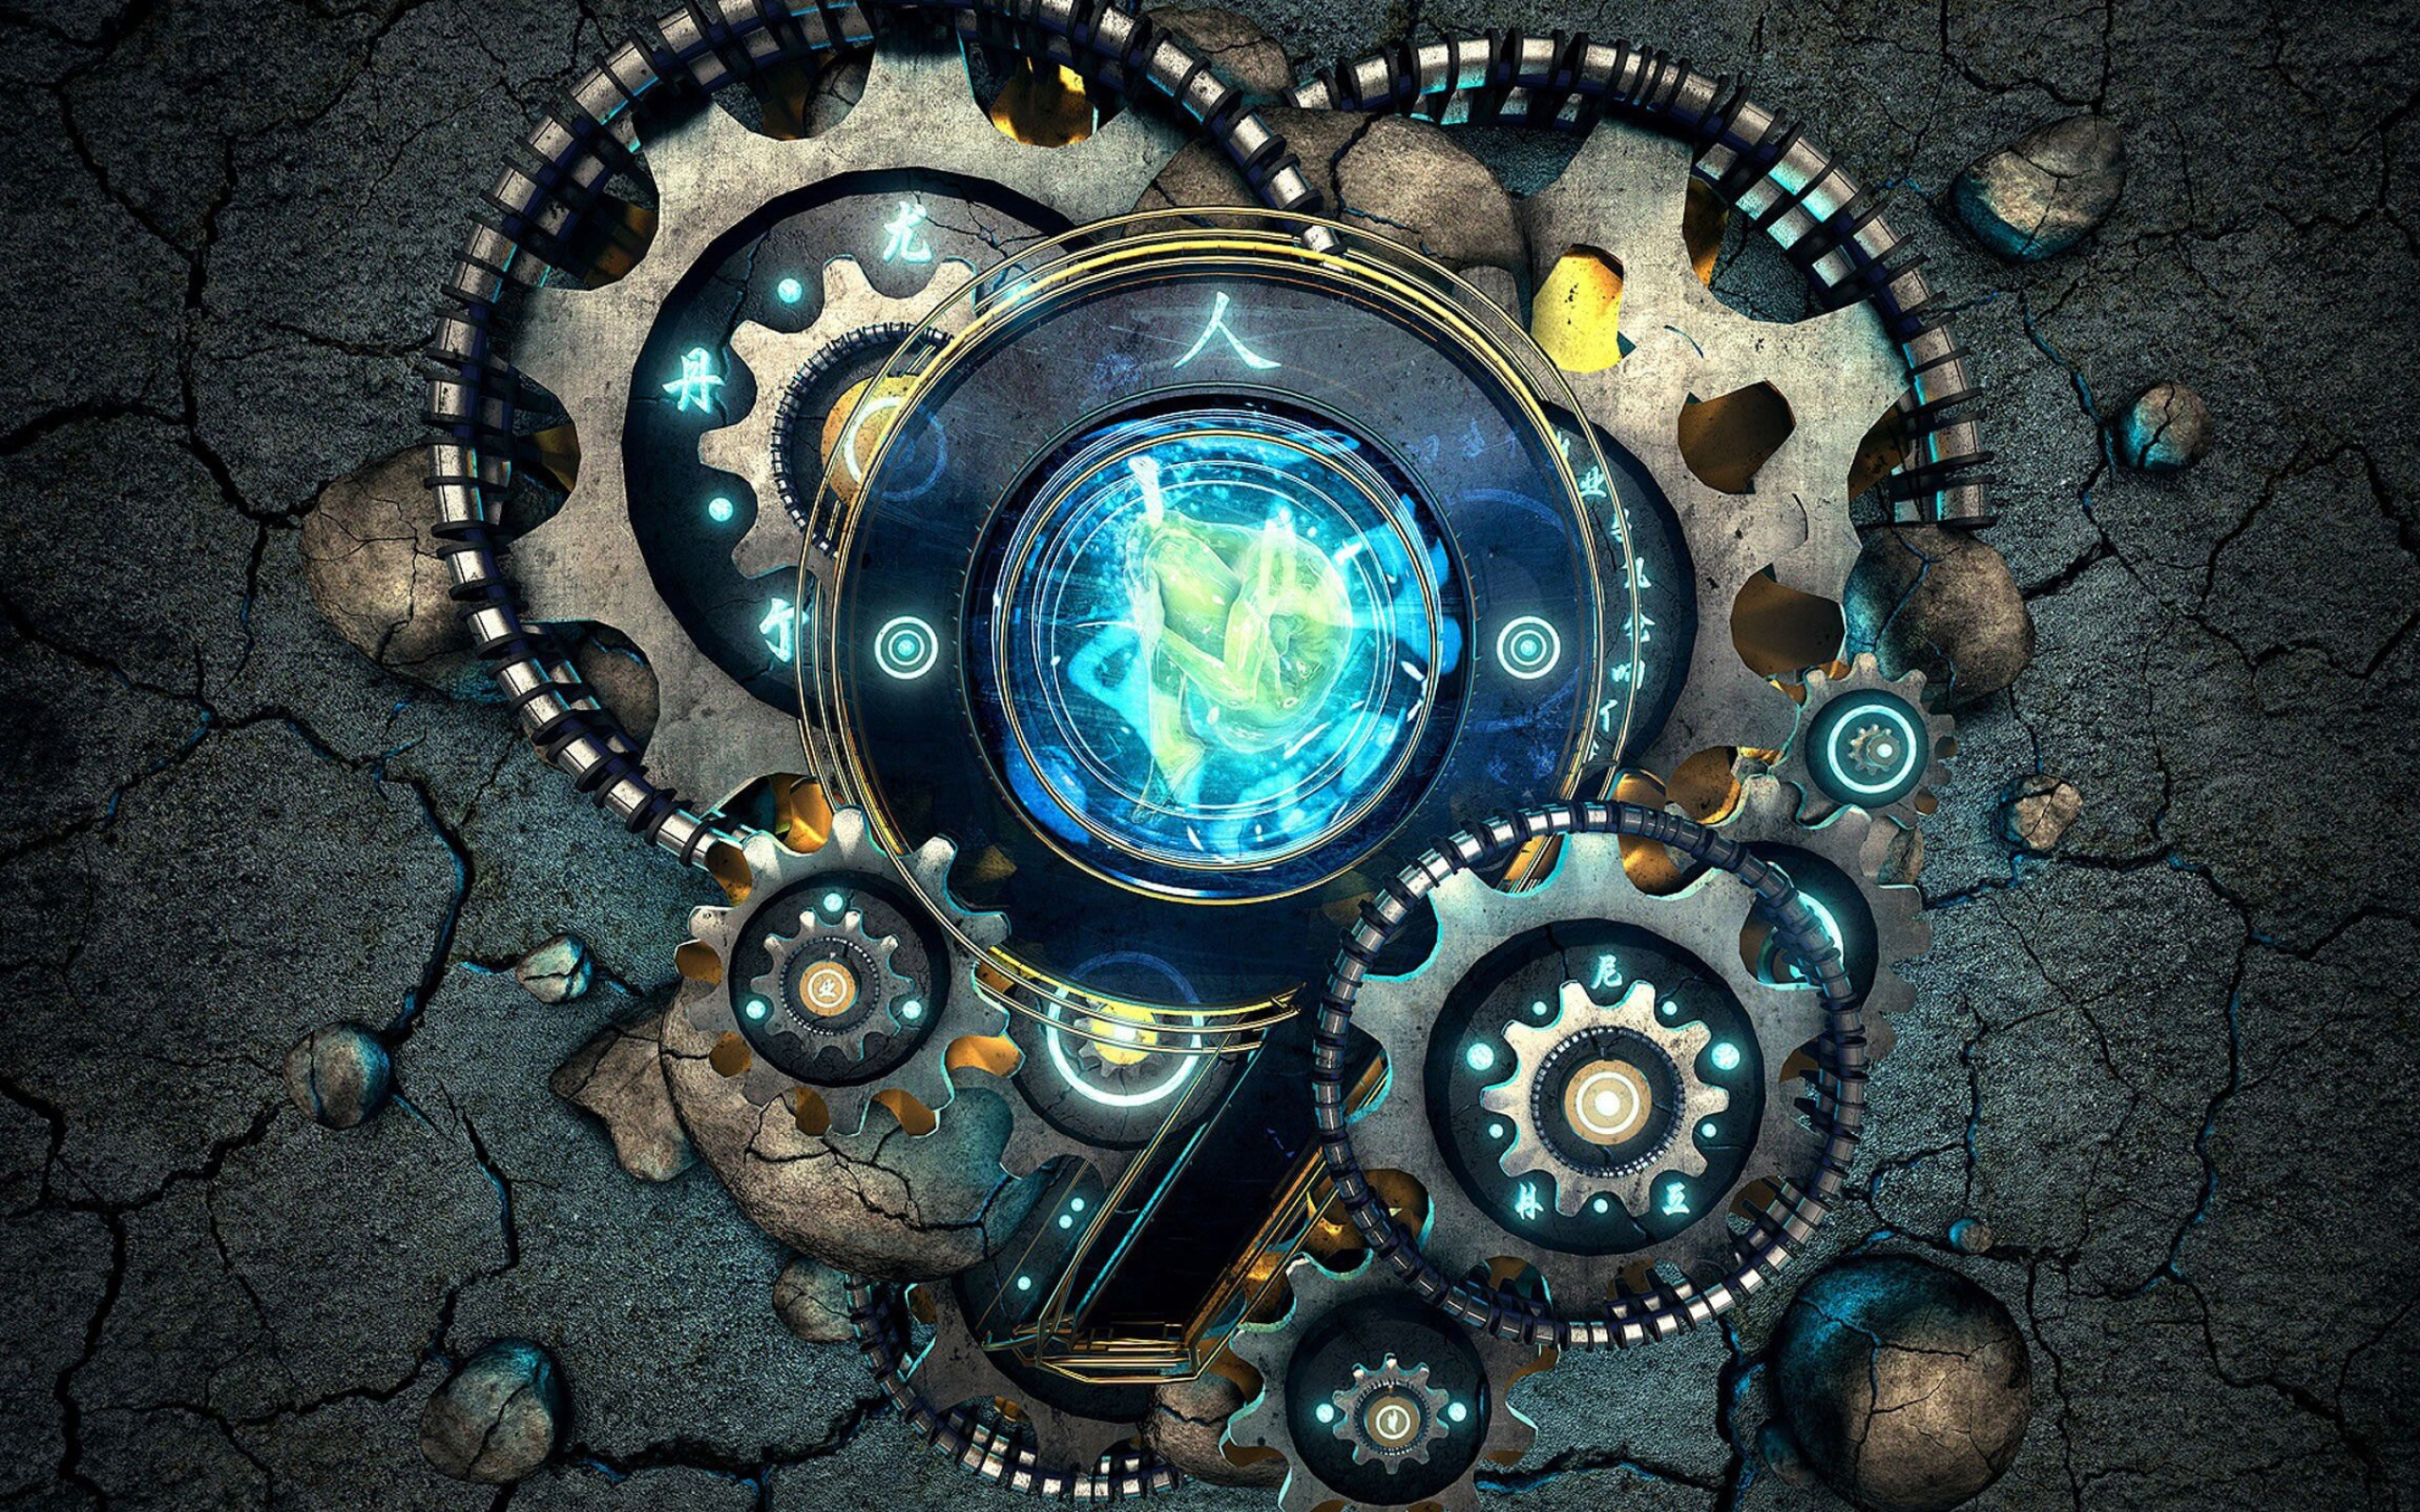 Gear: Steampunk, A toothed wheel that engages another toothed mechanism, A transmission. 2560x1600 HD Wallpaper.